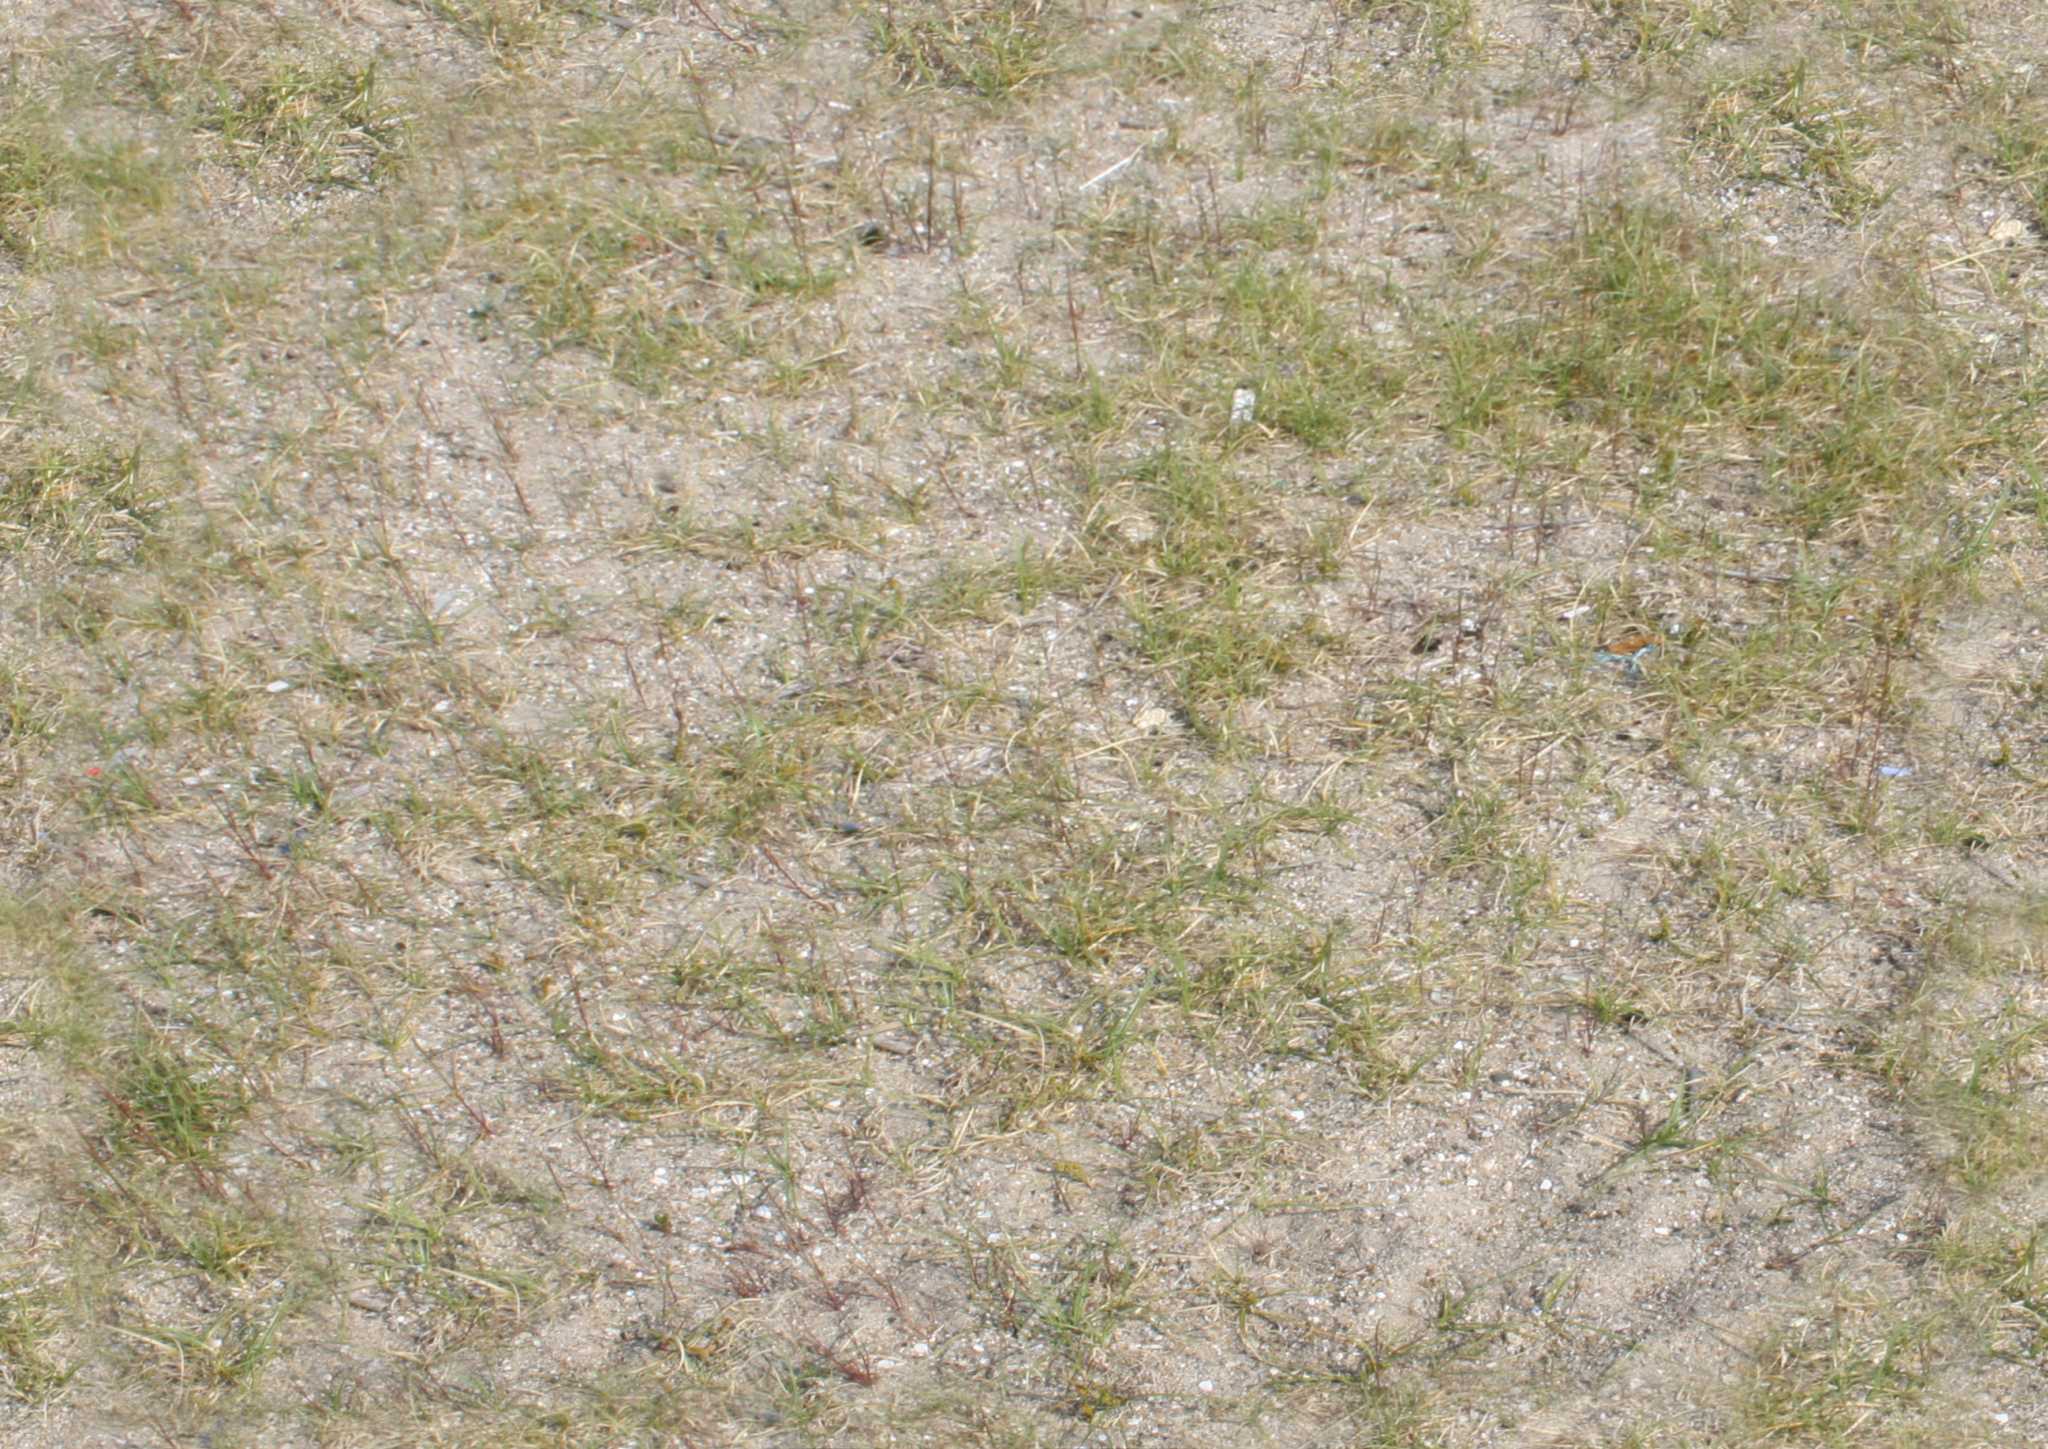 Sand Texture - Sand - Seamless Texture with normalmap | OpenGameArt.org